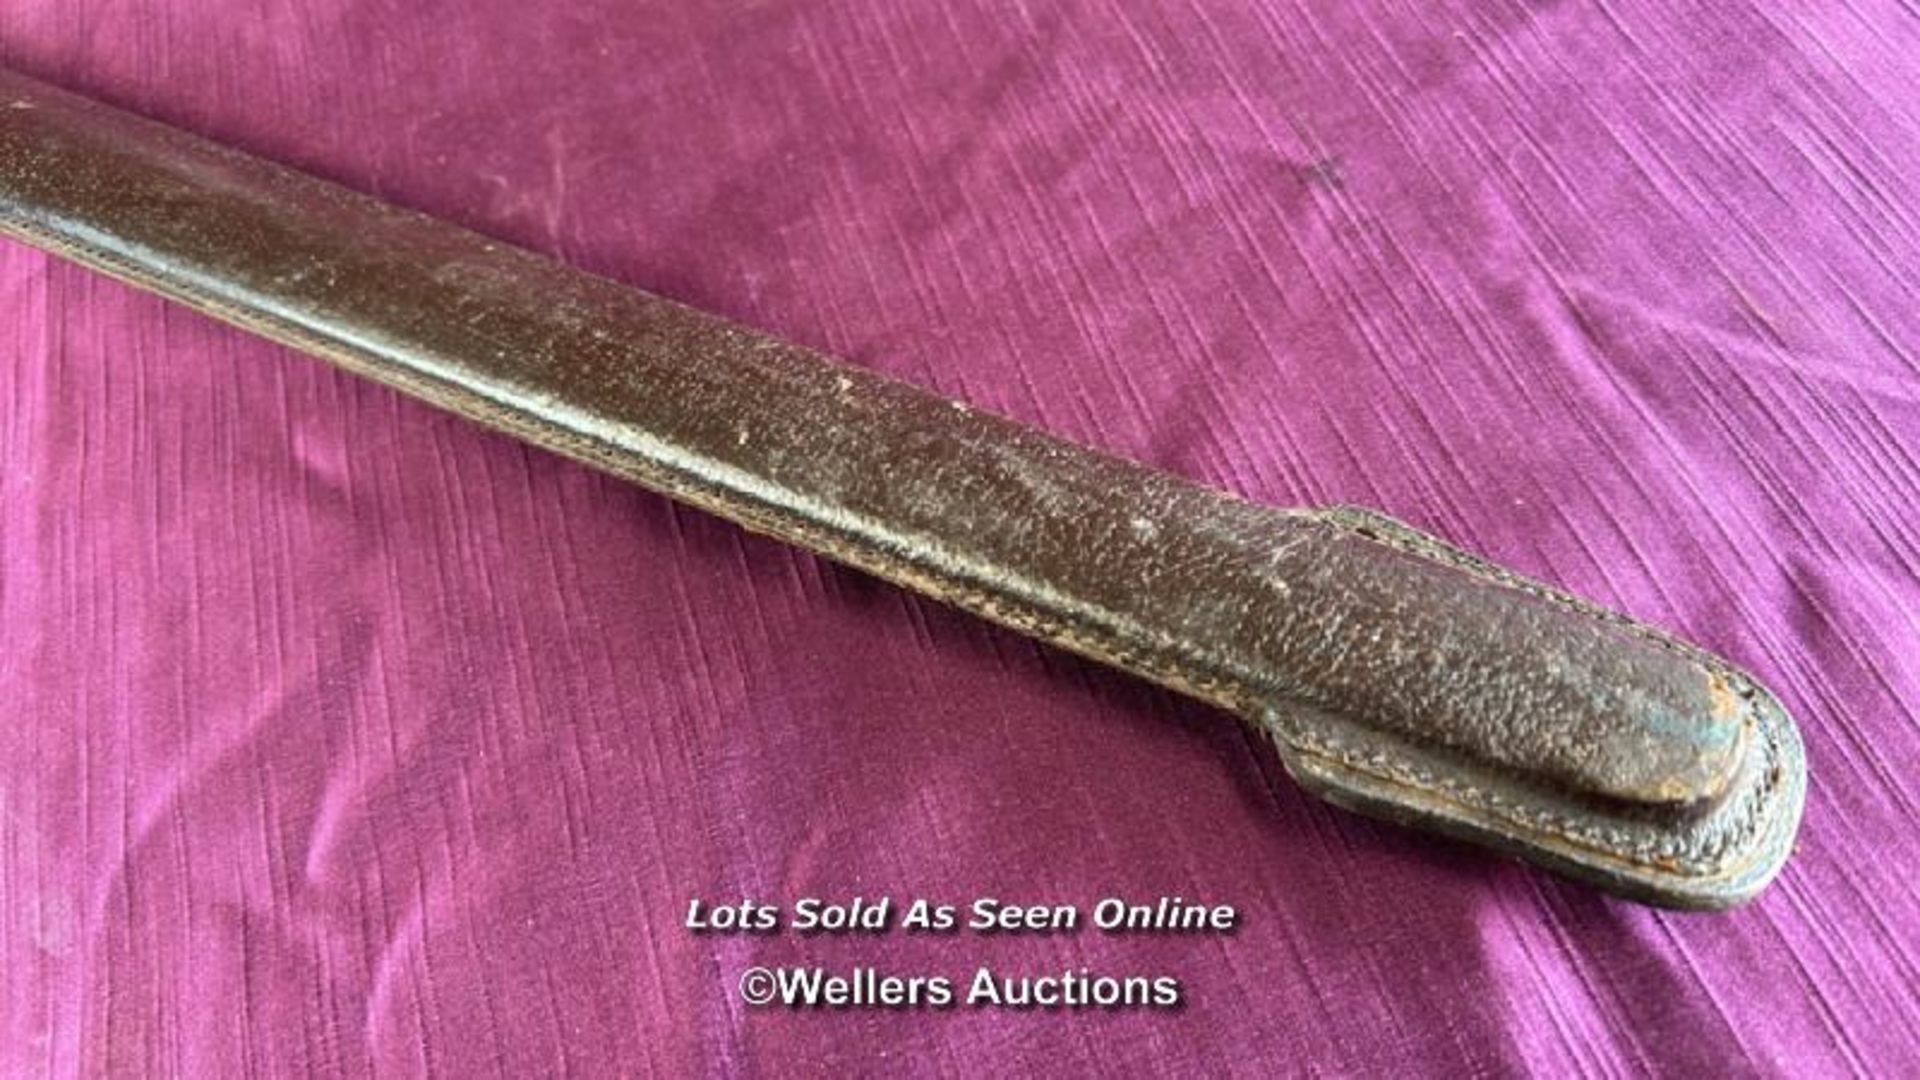 ANTIQUE INFANTRY OFFICERS SWORD WITH LEATHER SCABBARD, LENGTH 99CM - Image 11 of 12